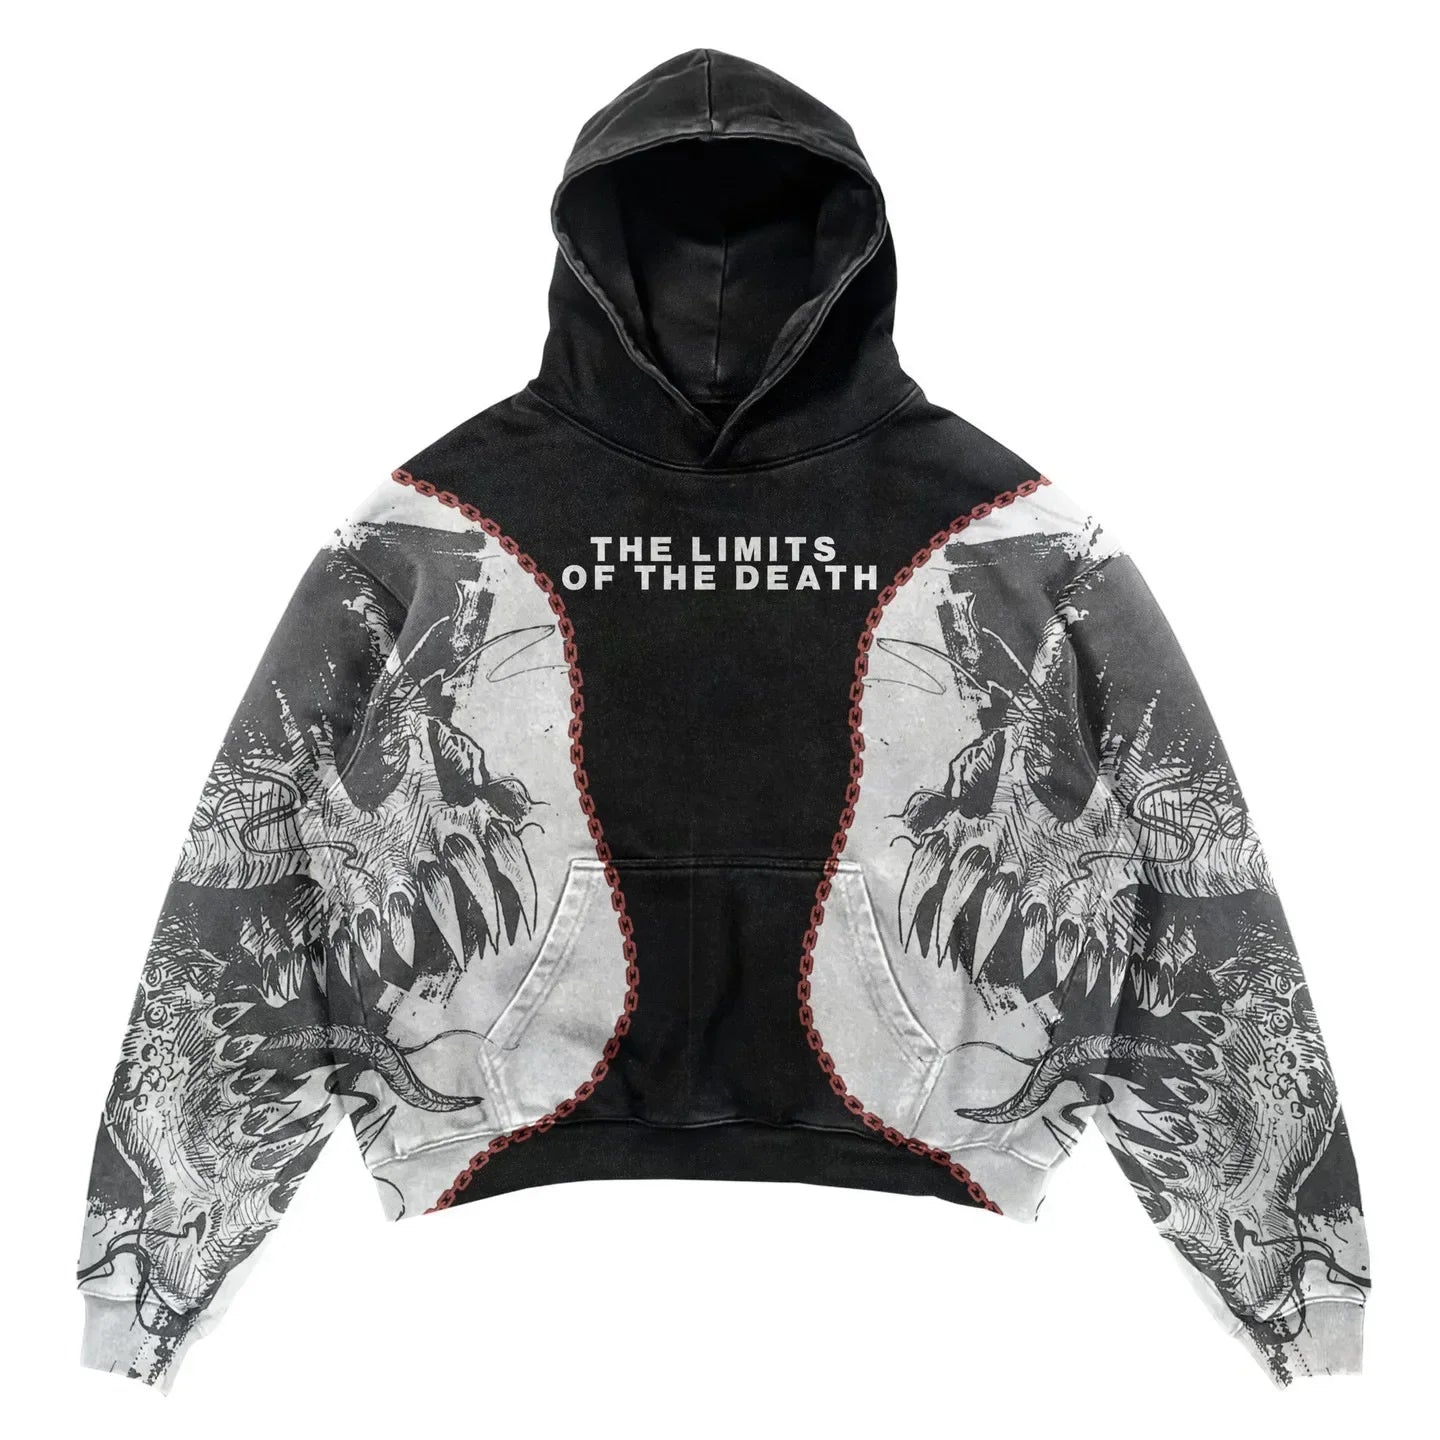 A black Maramalive™ Explosions Printed Skull Y2K Retro Hooded Sweater Coat Street Style Gothic Casual Fashion Hooded Sweater Men's Female featuring "THE LIMITS OF THE DEATH" text on the chest, with an artistic design of monstrous faces and intricate patterns adorning the sleeves and torso, perfect for those who embrace punk style in all four seasons.